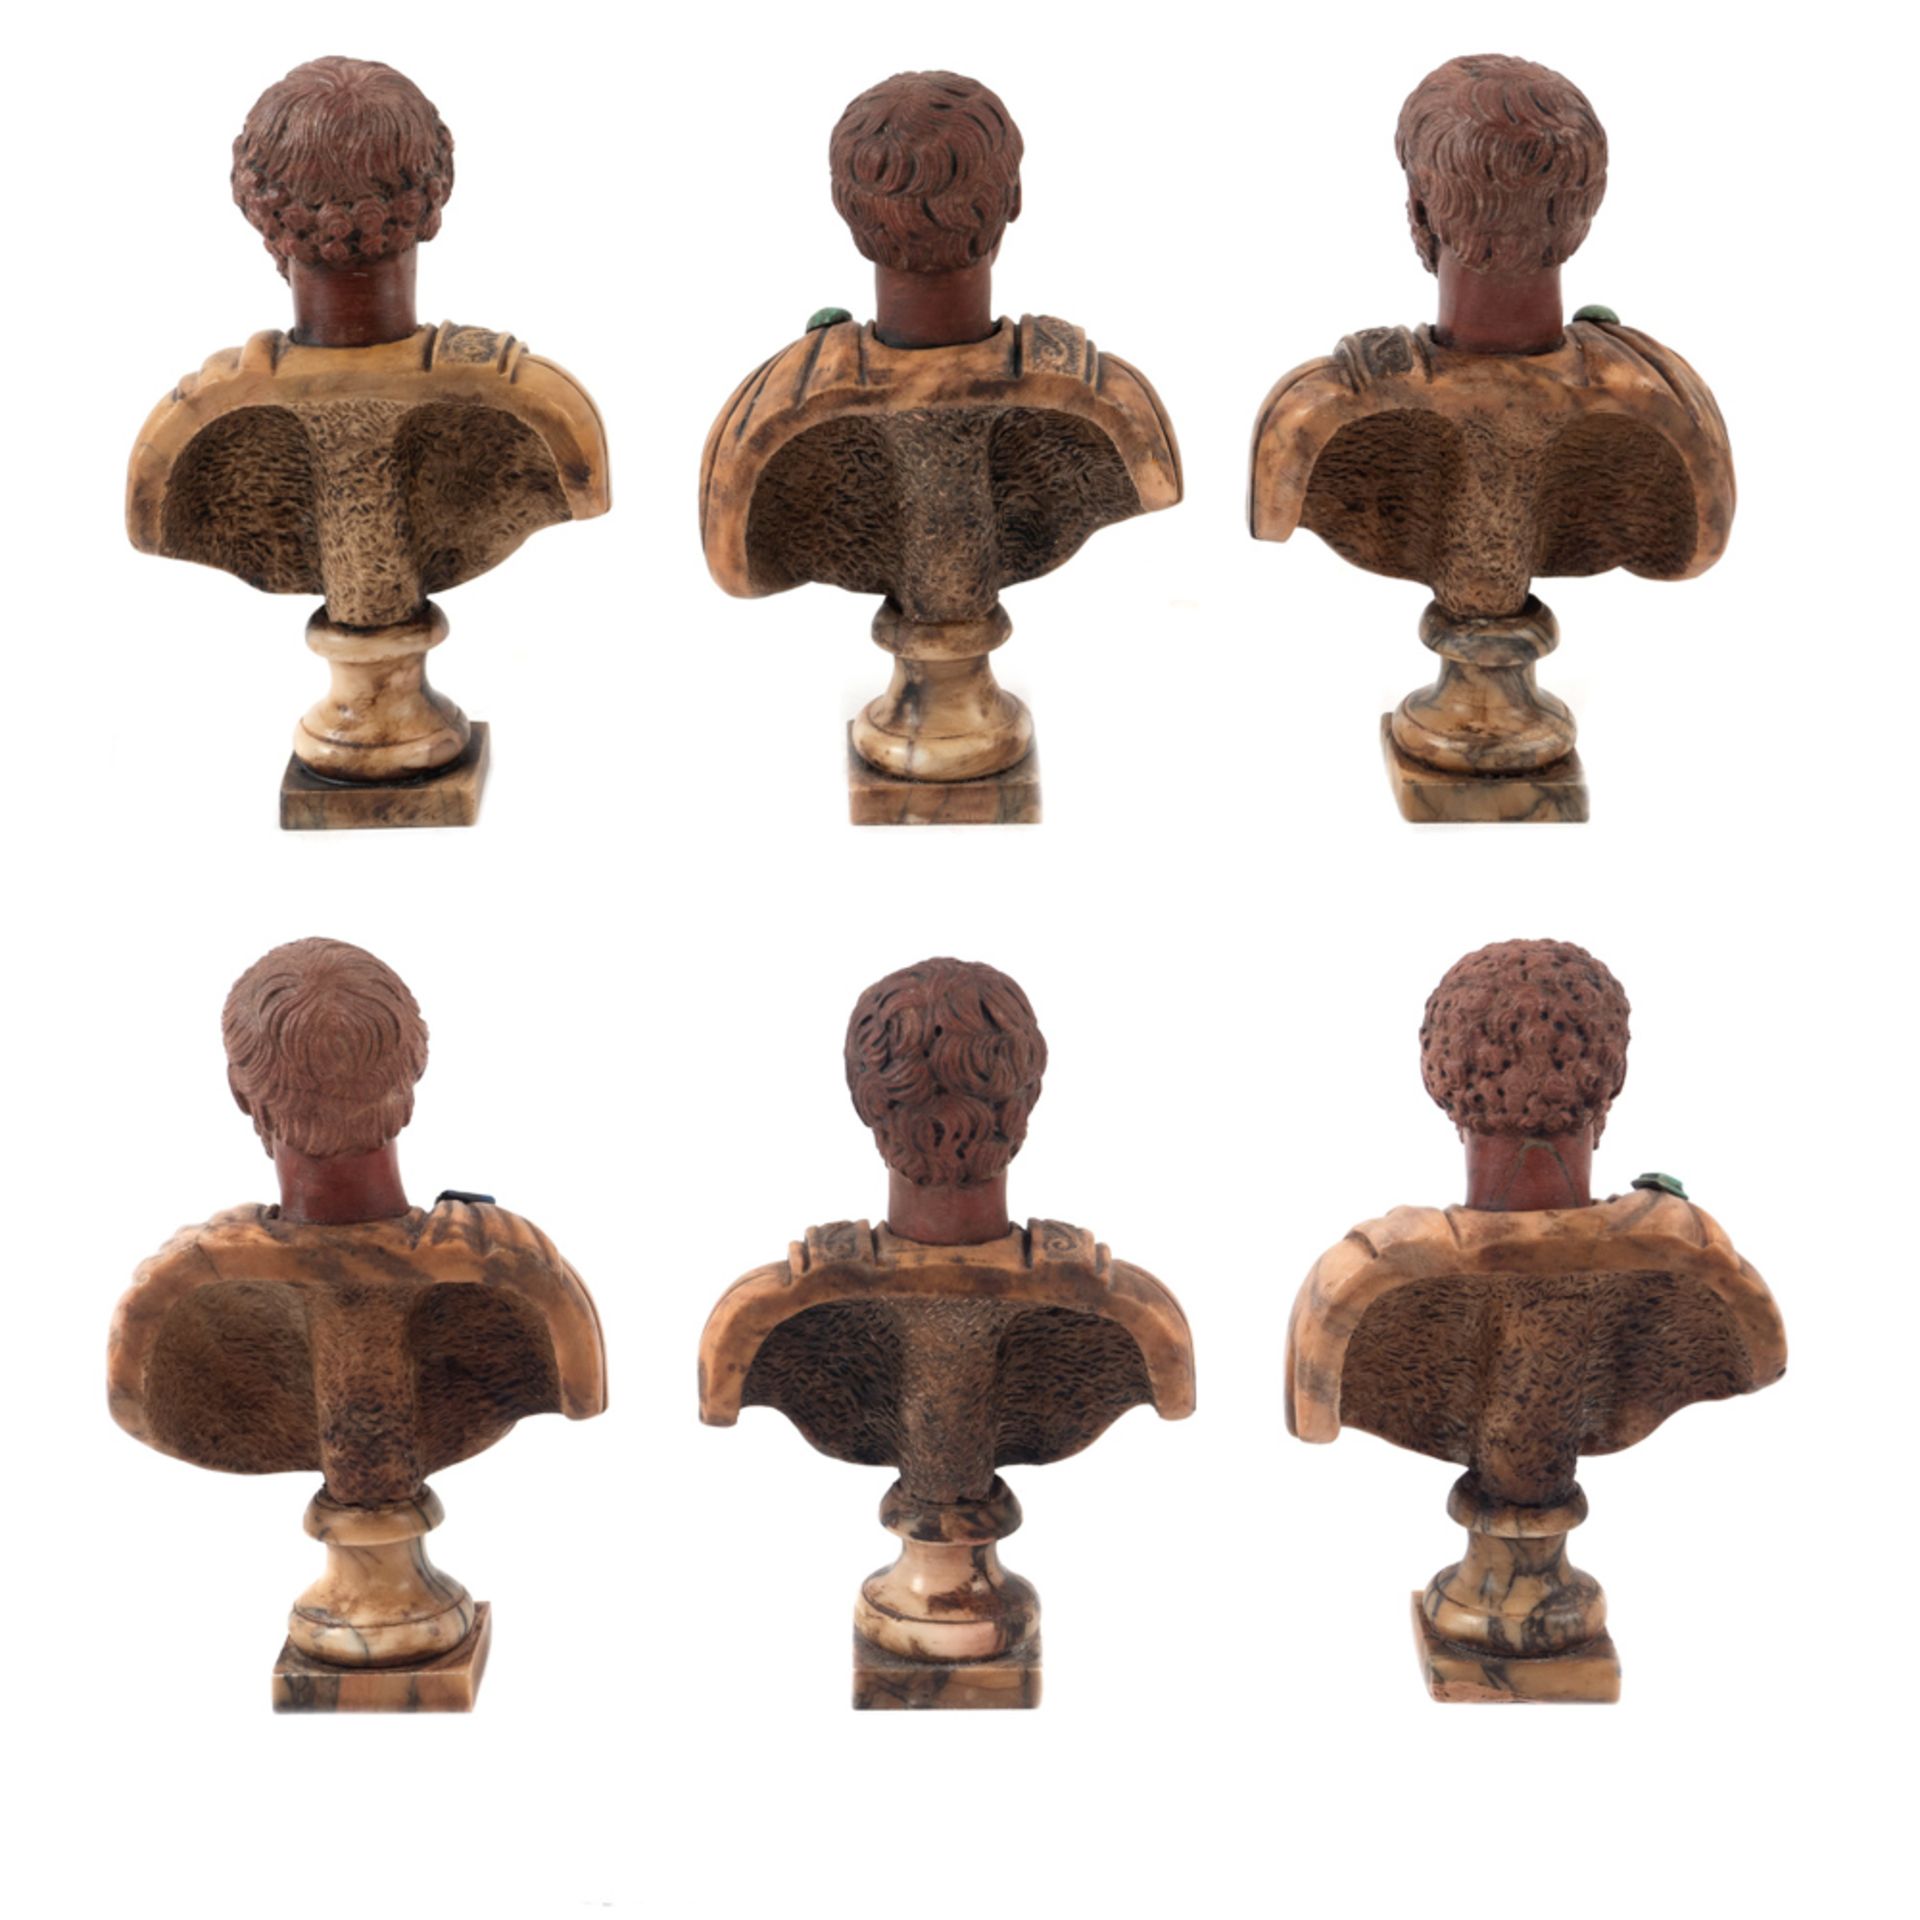 Collection of polychrome marbles busts (6) 19th-20th century max. h 19 cm. - Image 2 of 2